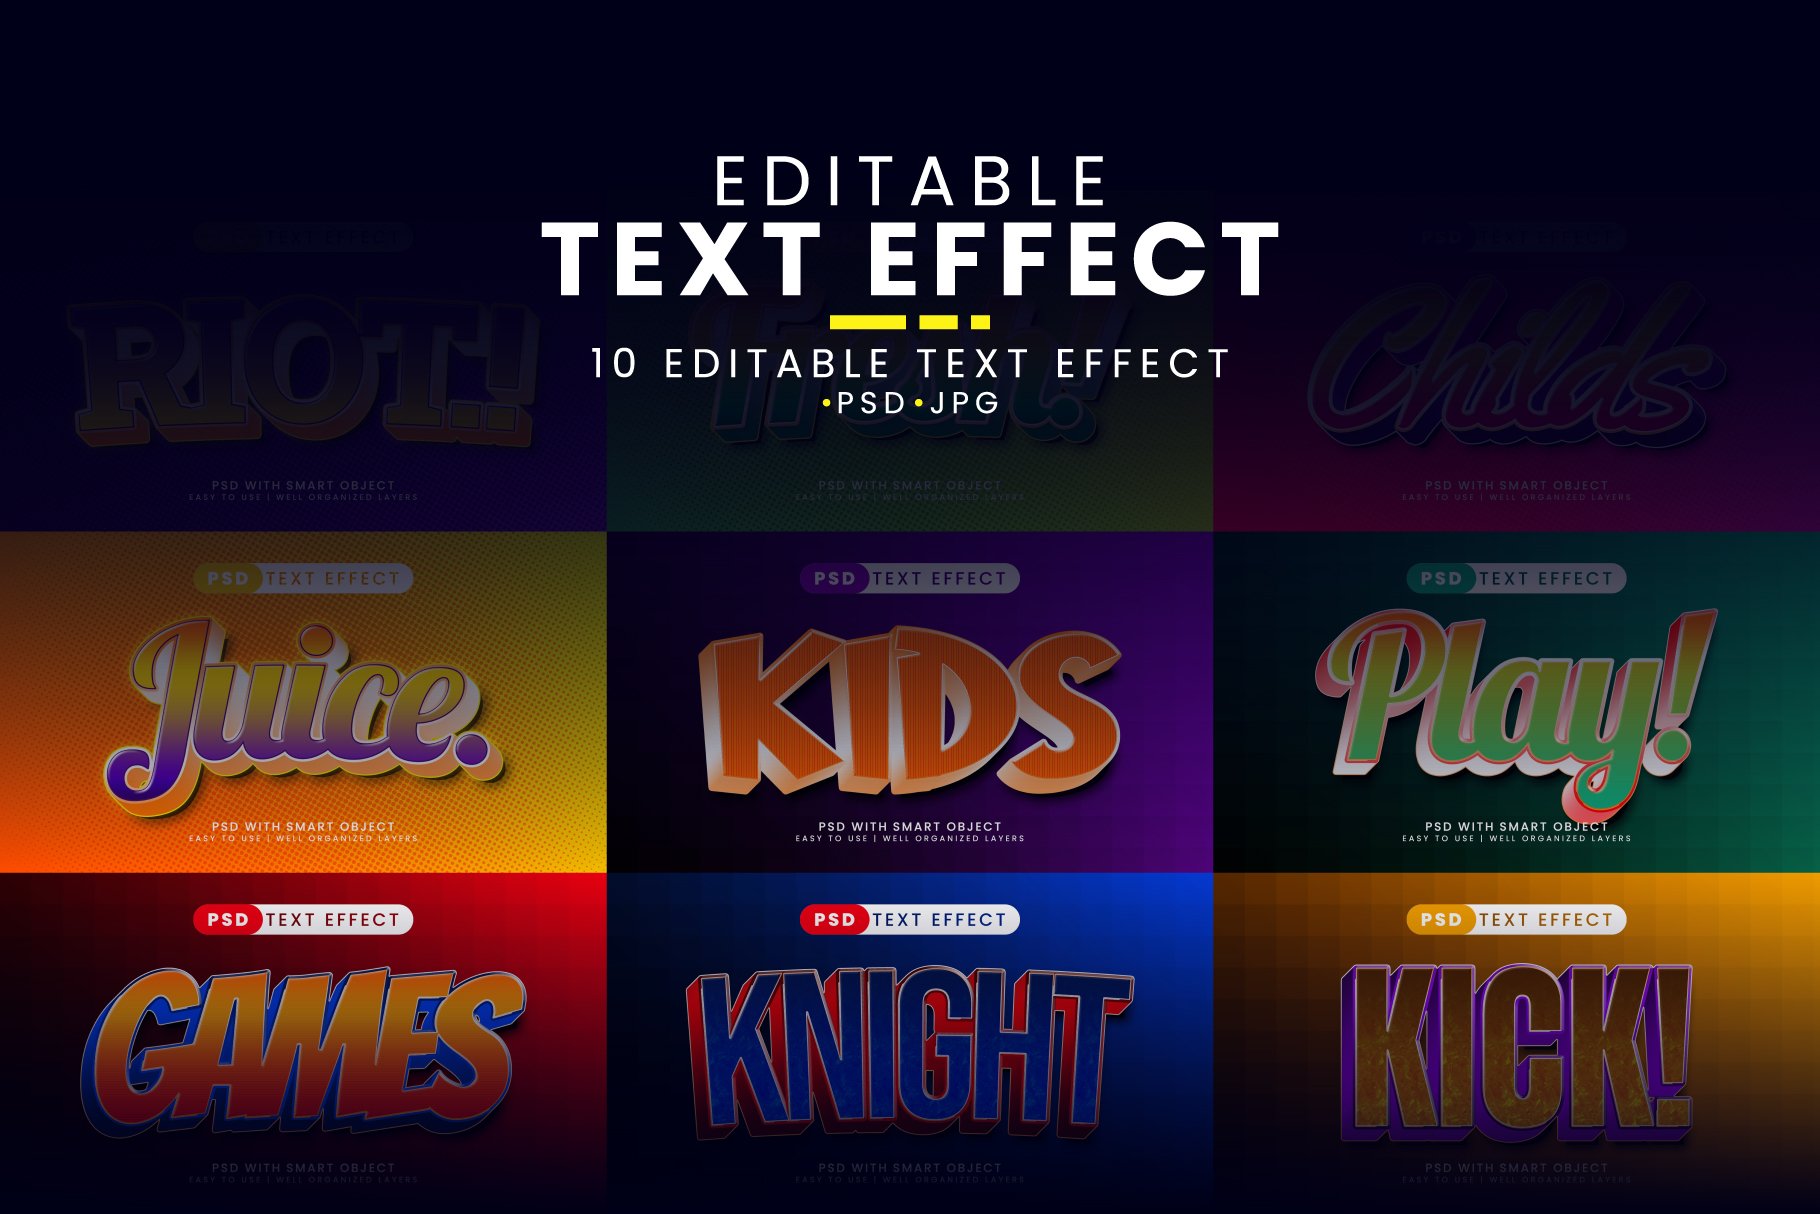 PSD Editable Text Effect Vol. 3cover image.